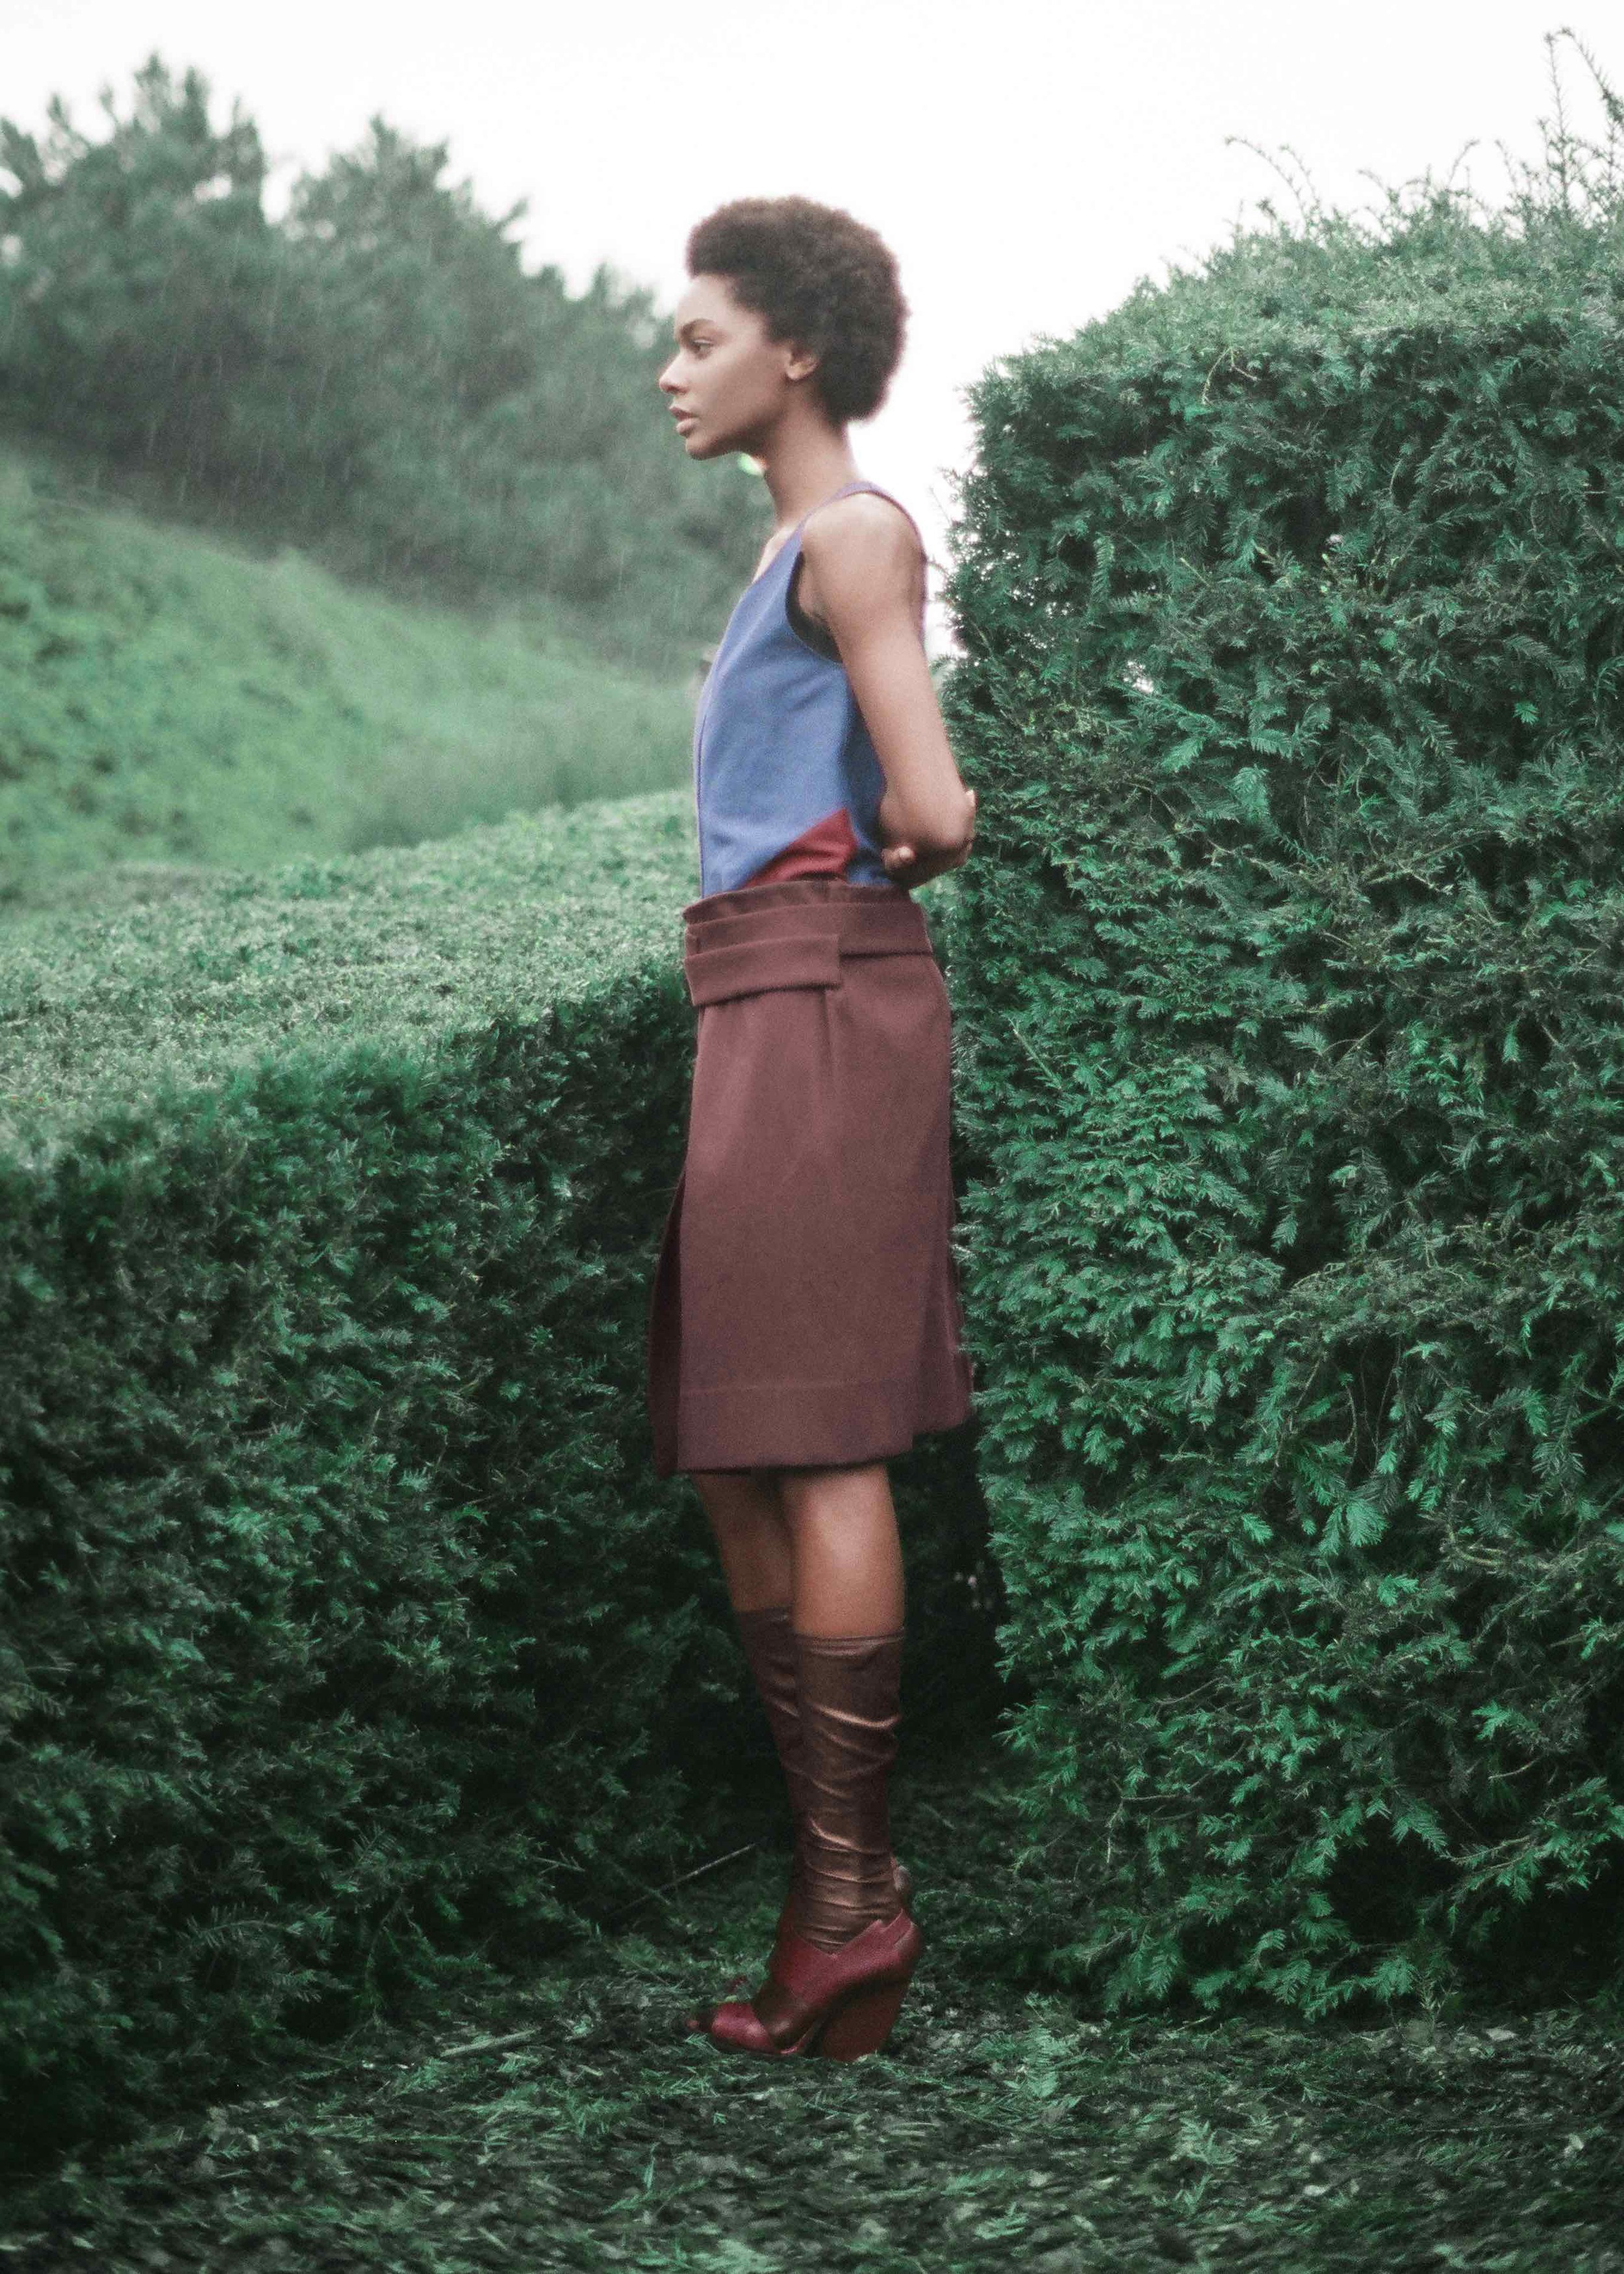  Blue and brown cotton gabardine dress, calf leather socks and sandals.&nbsp; 